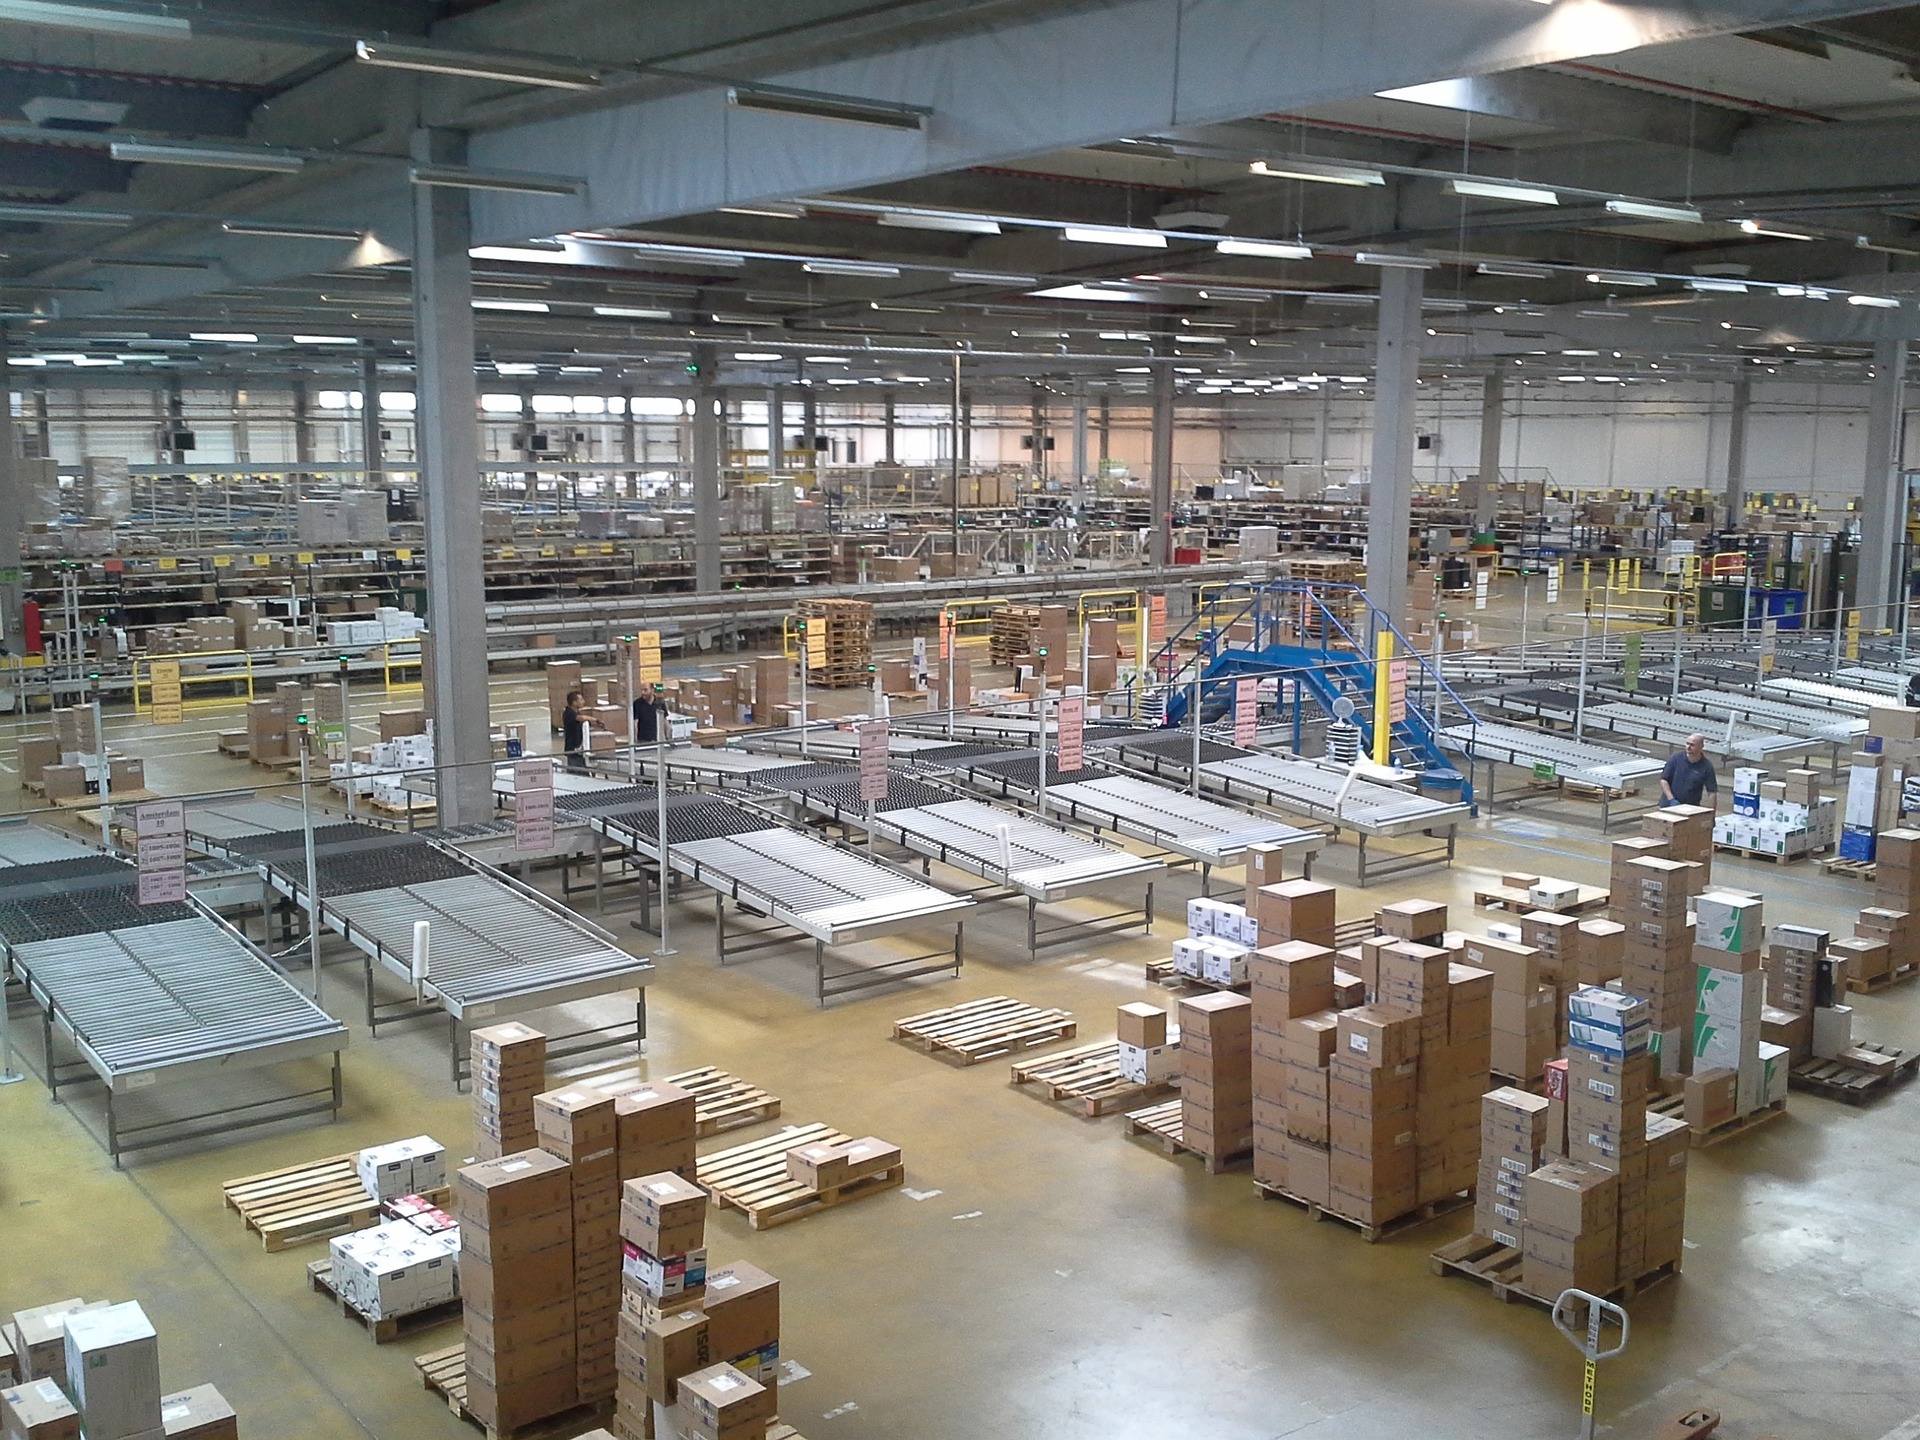 Reducing the need for decanting through better warehouse automation